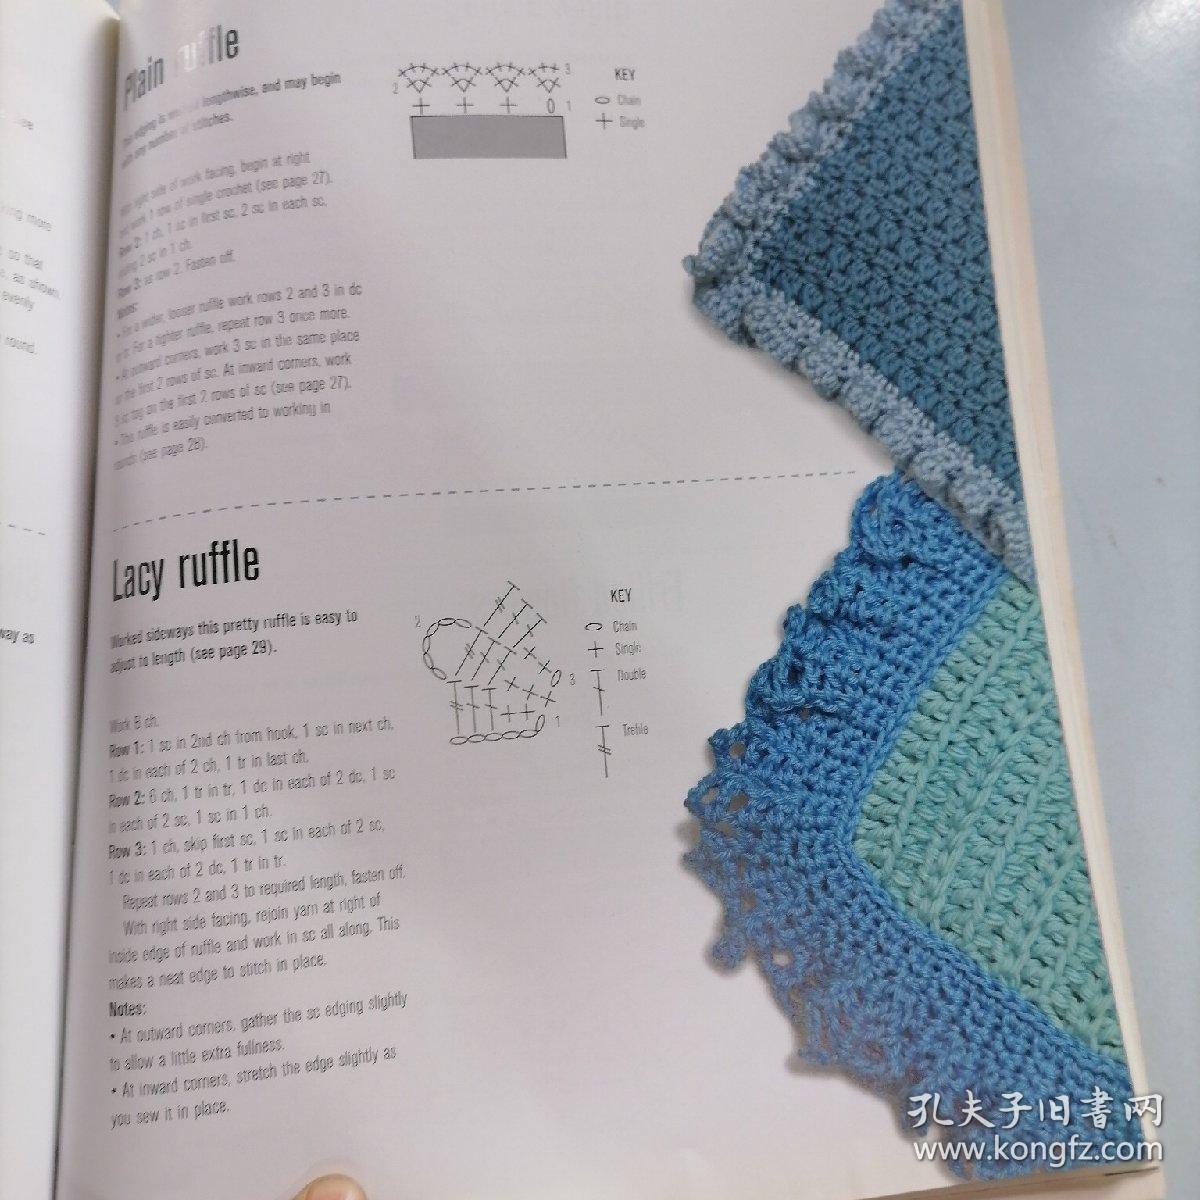 Super Finishing Techniques for Crocheters: Inspiration, Projects, and More for Finishing Crochet Patterns with Style (Knit & Crochet) 编织钩针和针织